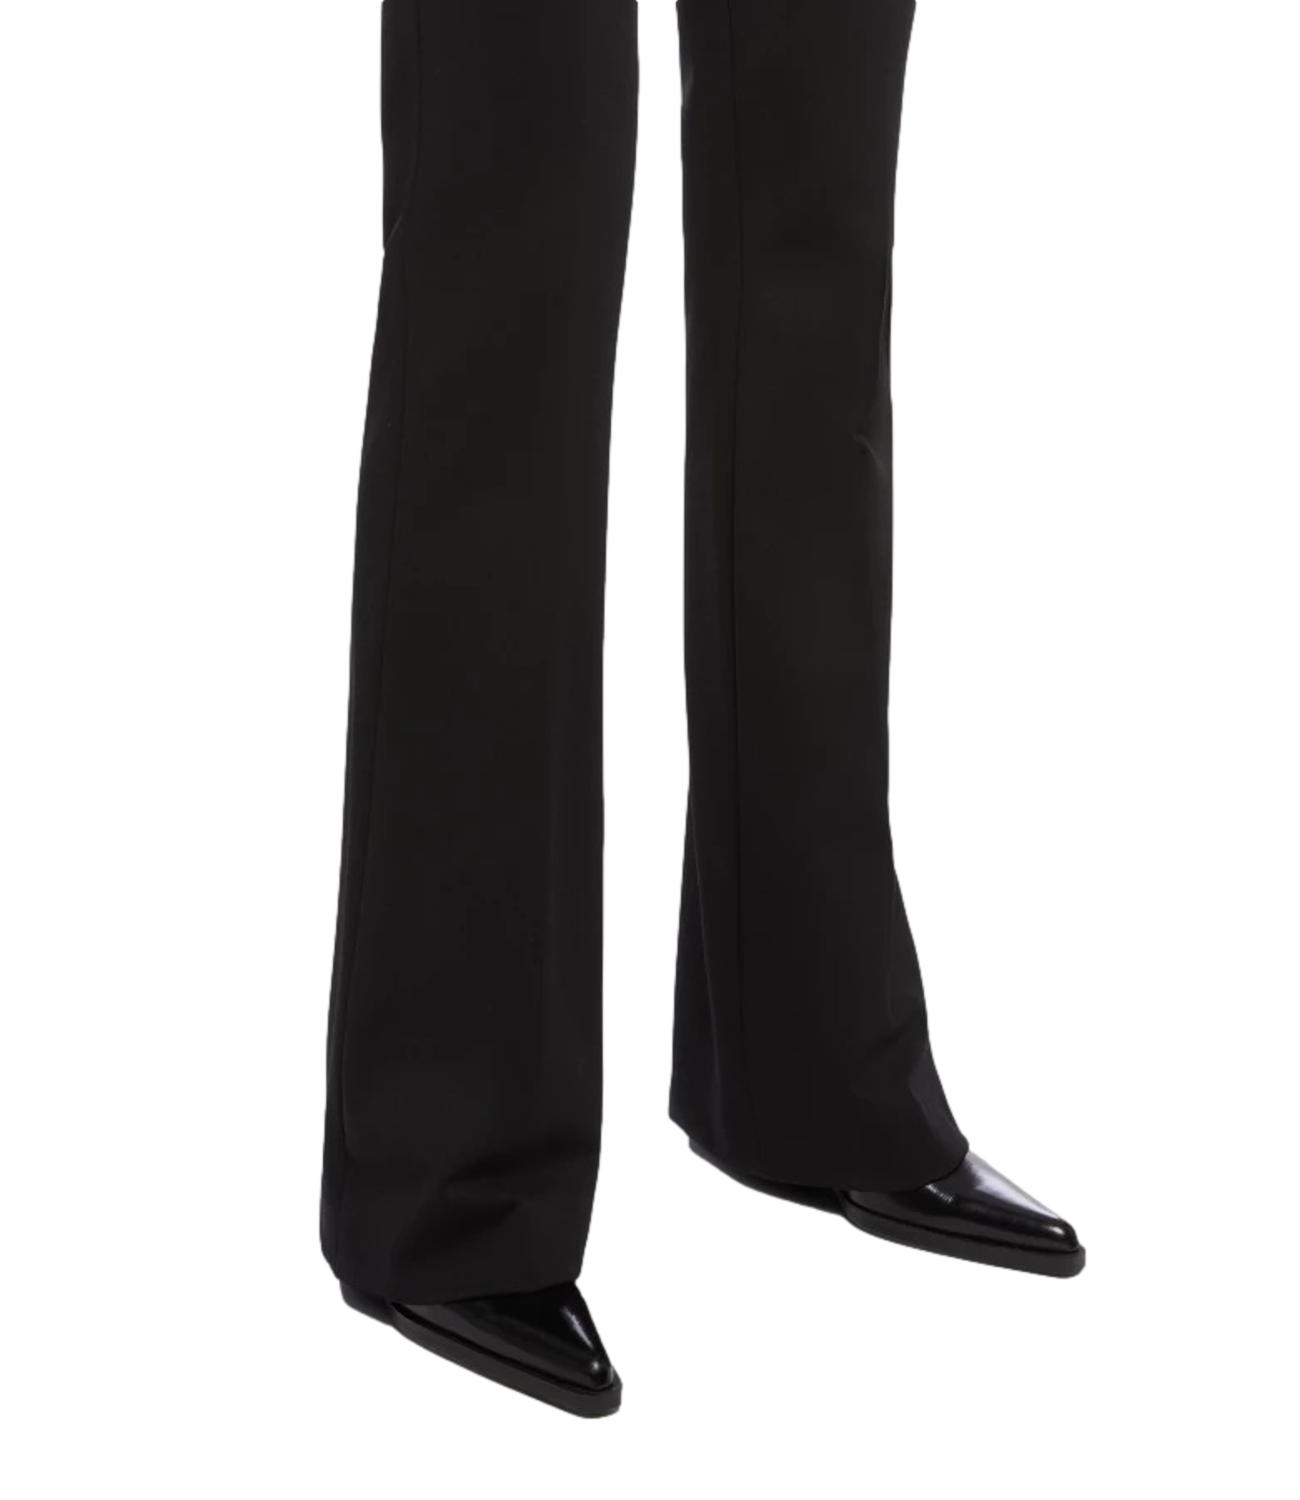 DONDUP Women's black flared trousers